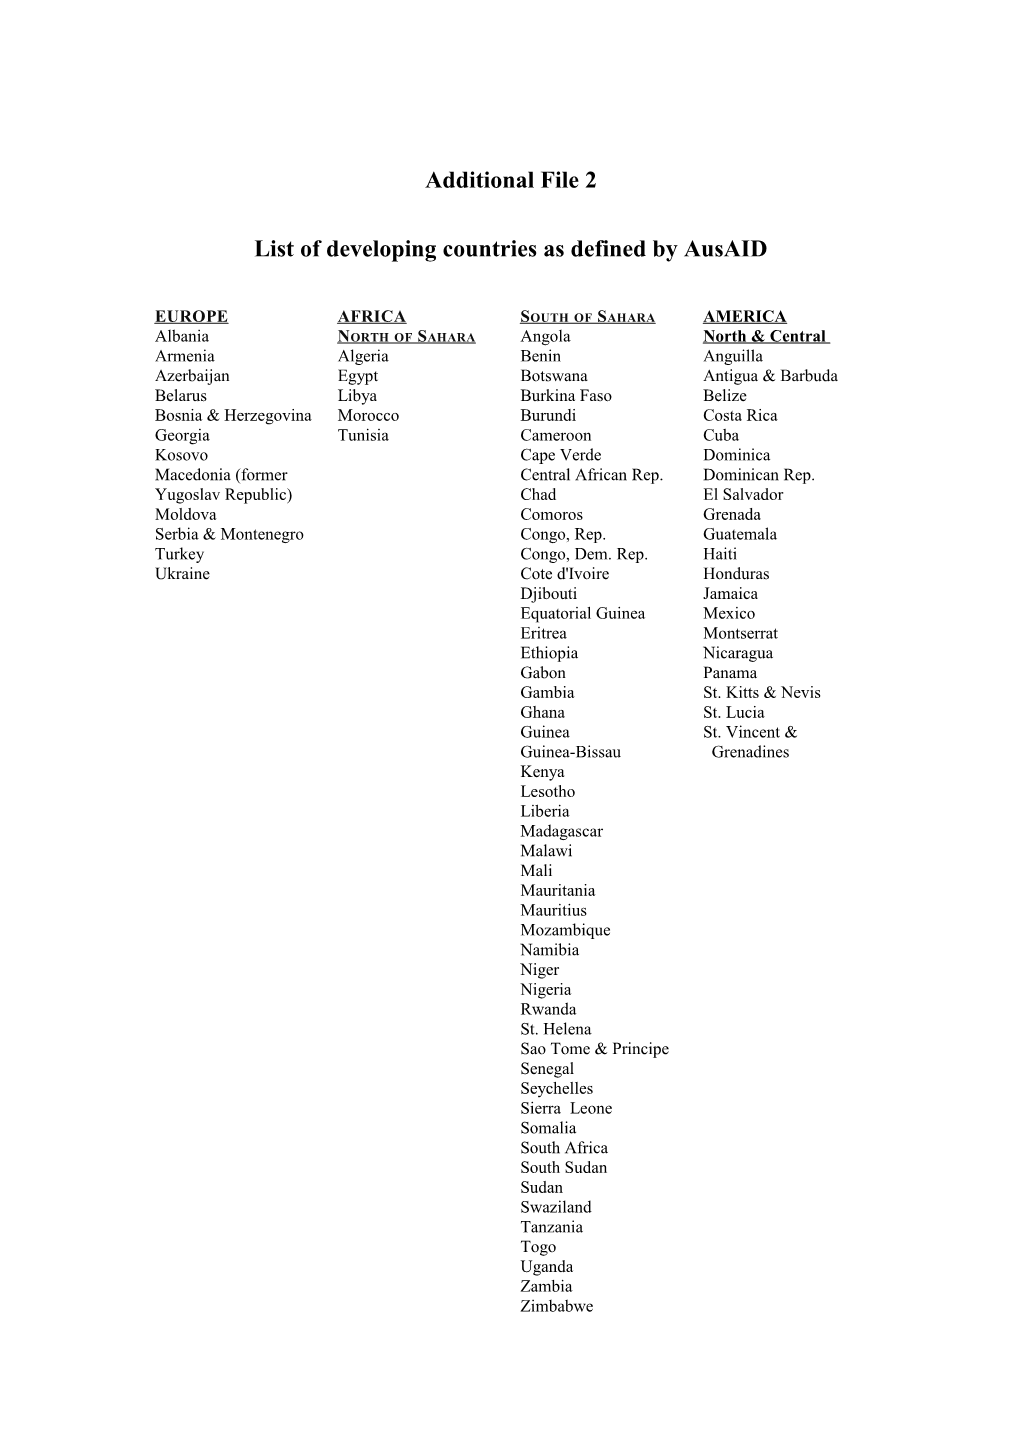 List of Developing Countries As Defined by Ausaid